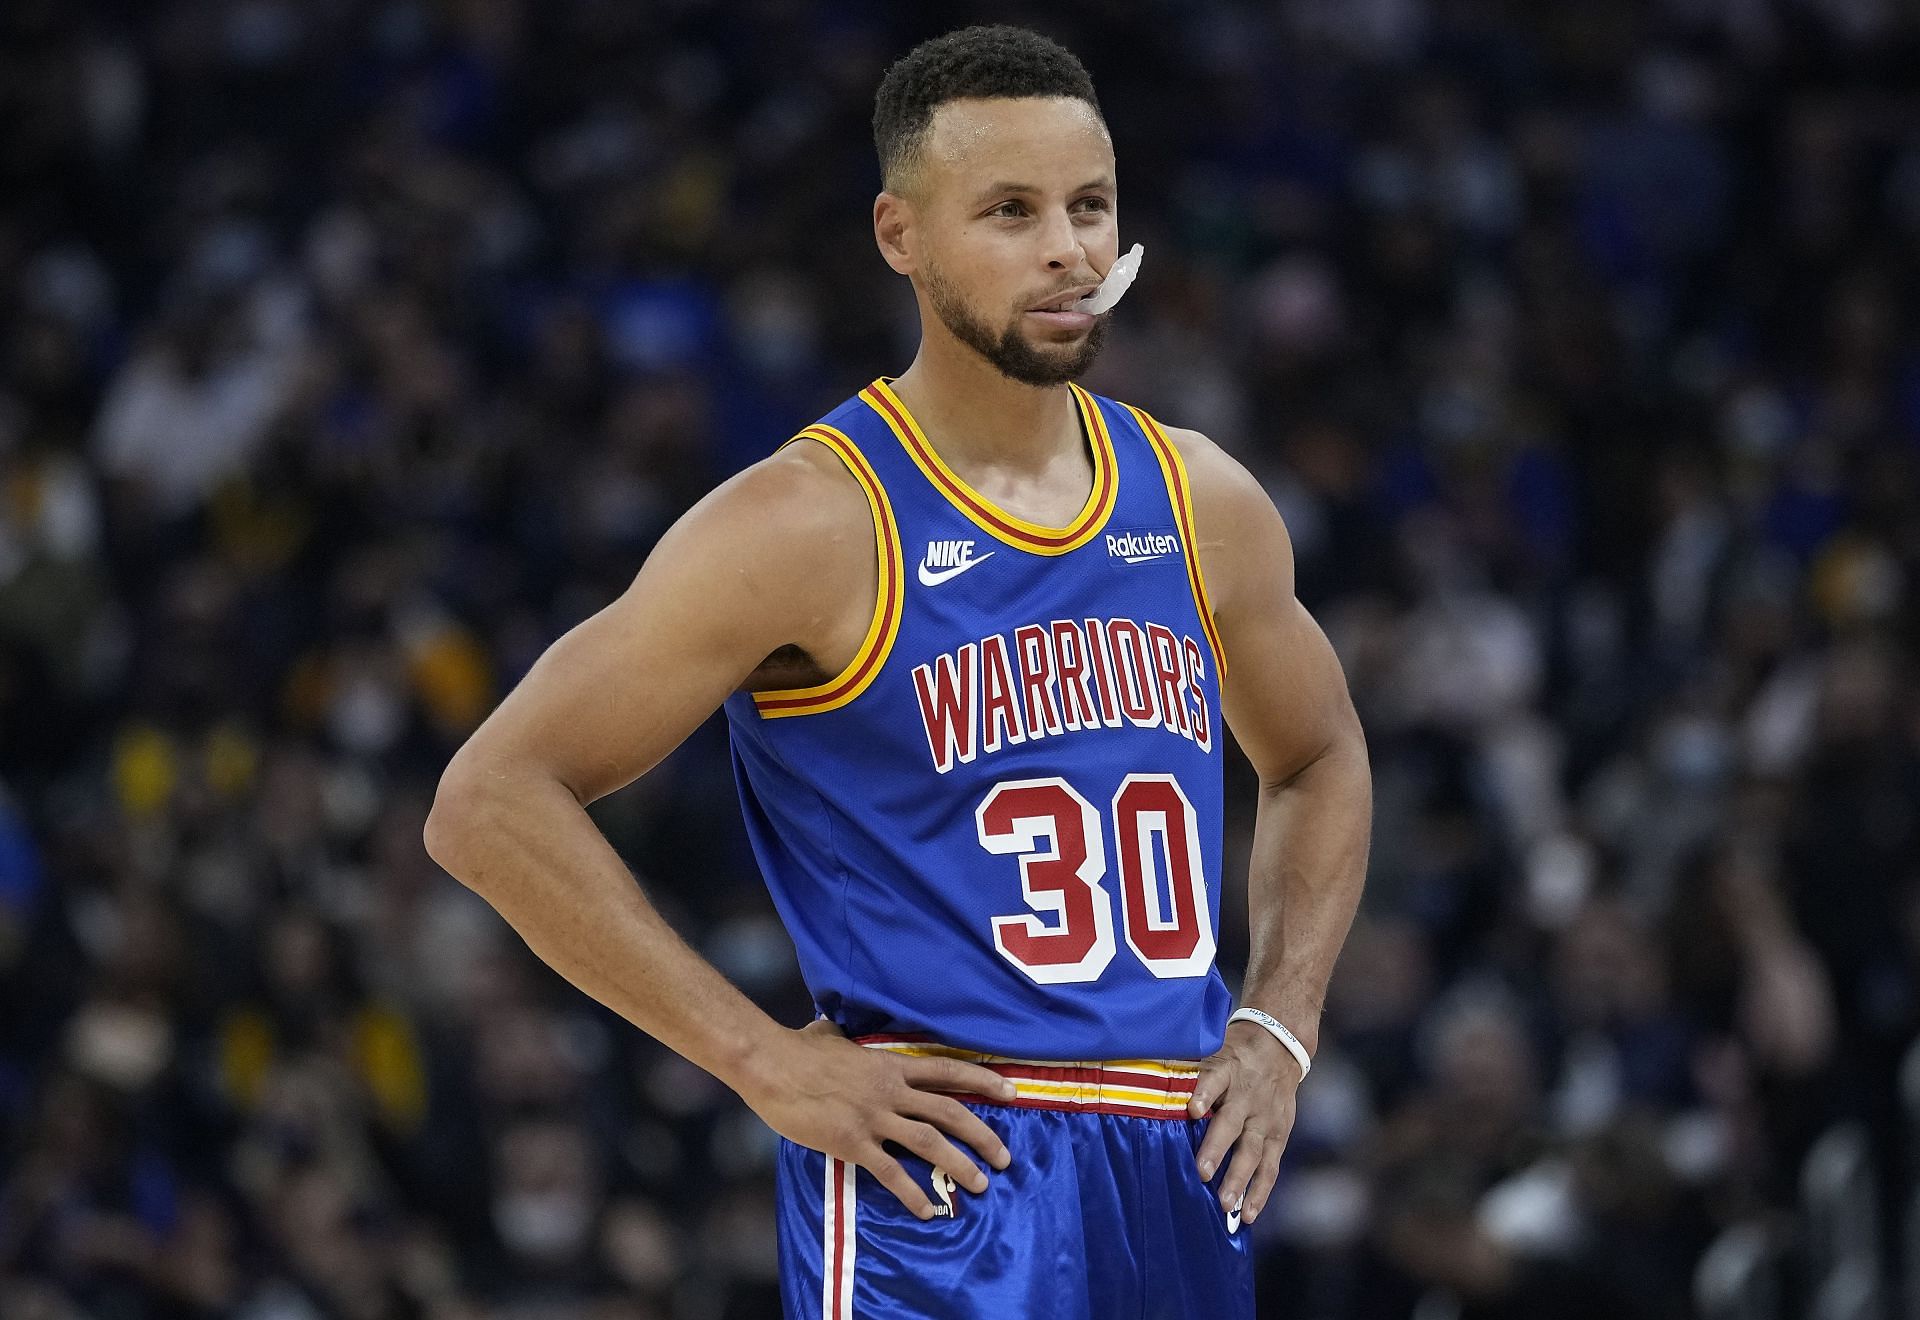 Stephen Curry went to work at the LA Clippers vs Golden State Warriors game